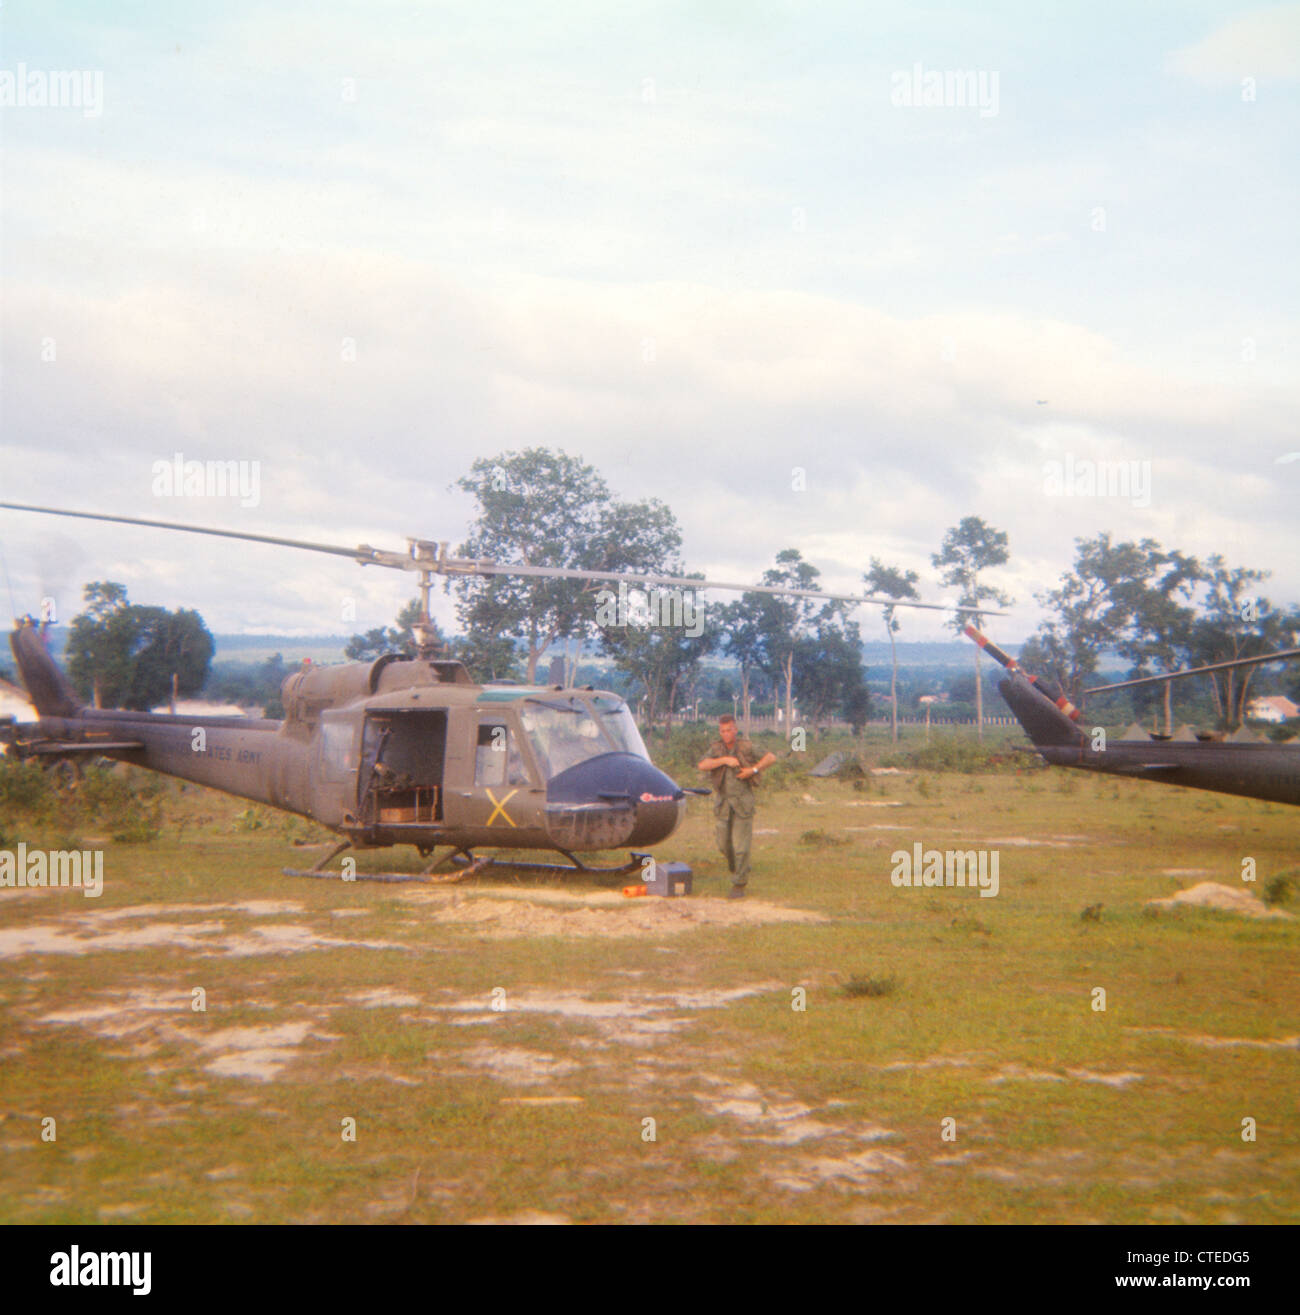 Huey helicopter parked at Landing Zone during Vietnam War B Model Stock Photo